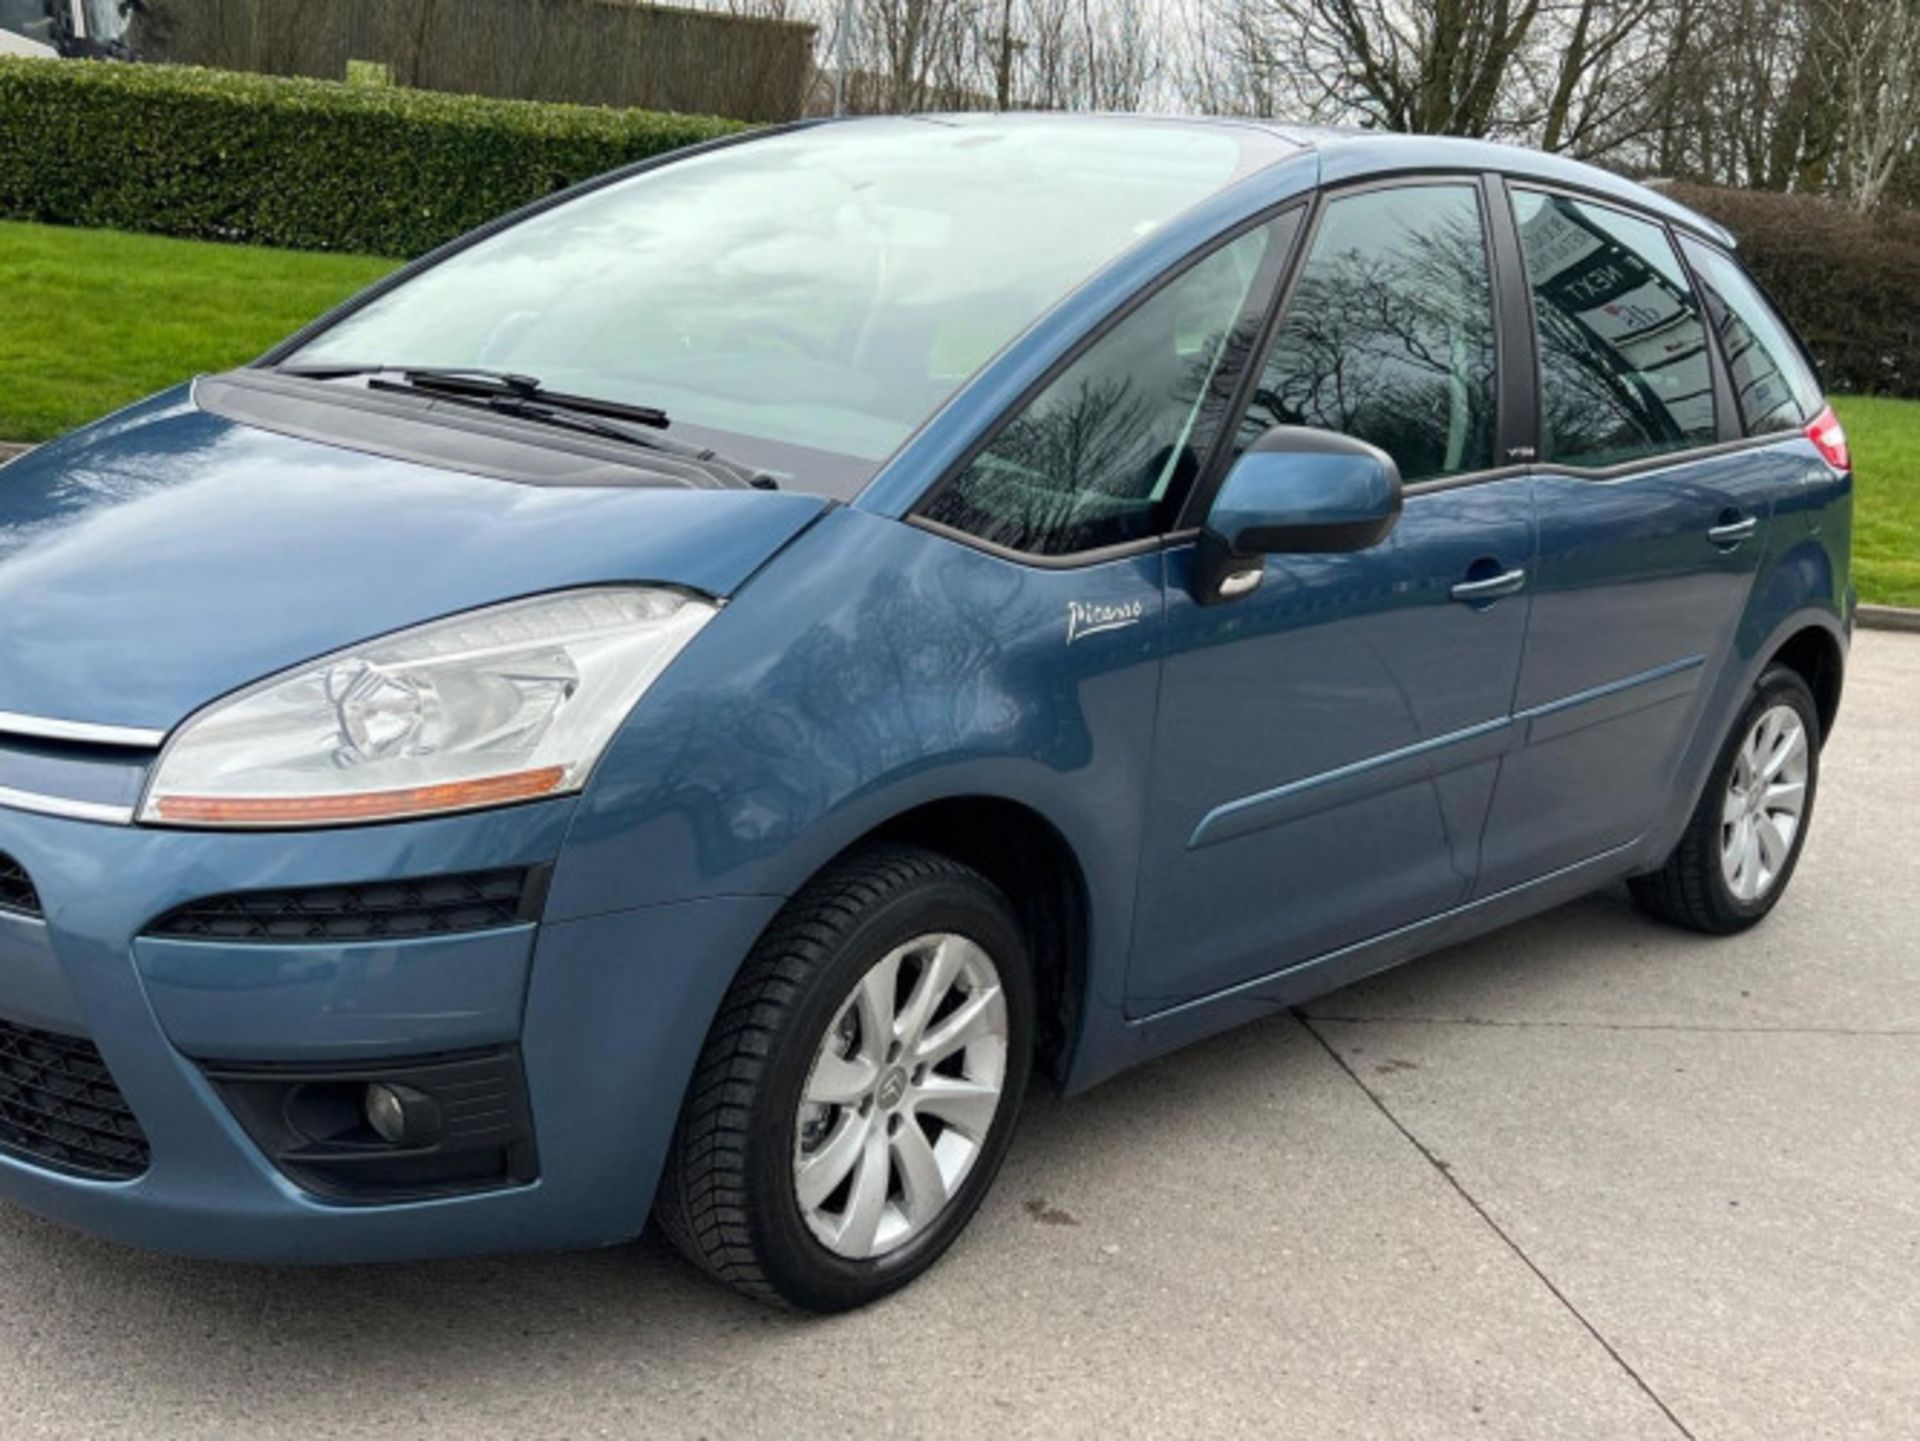 2009 CITROEN C4 PICASSO 1.6 HDI VTR+ EGS6 5DR >>--NO VAT ON HAMMER--<< - Image 106 of 123